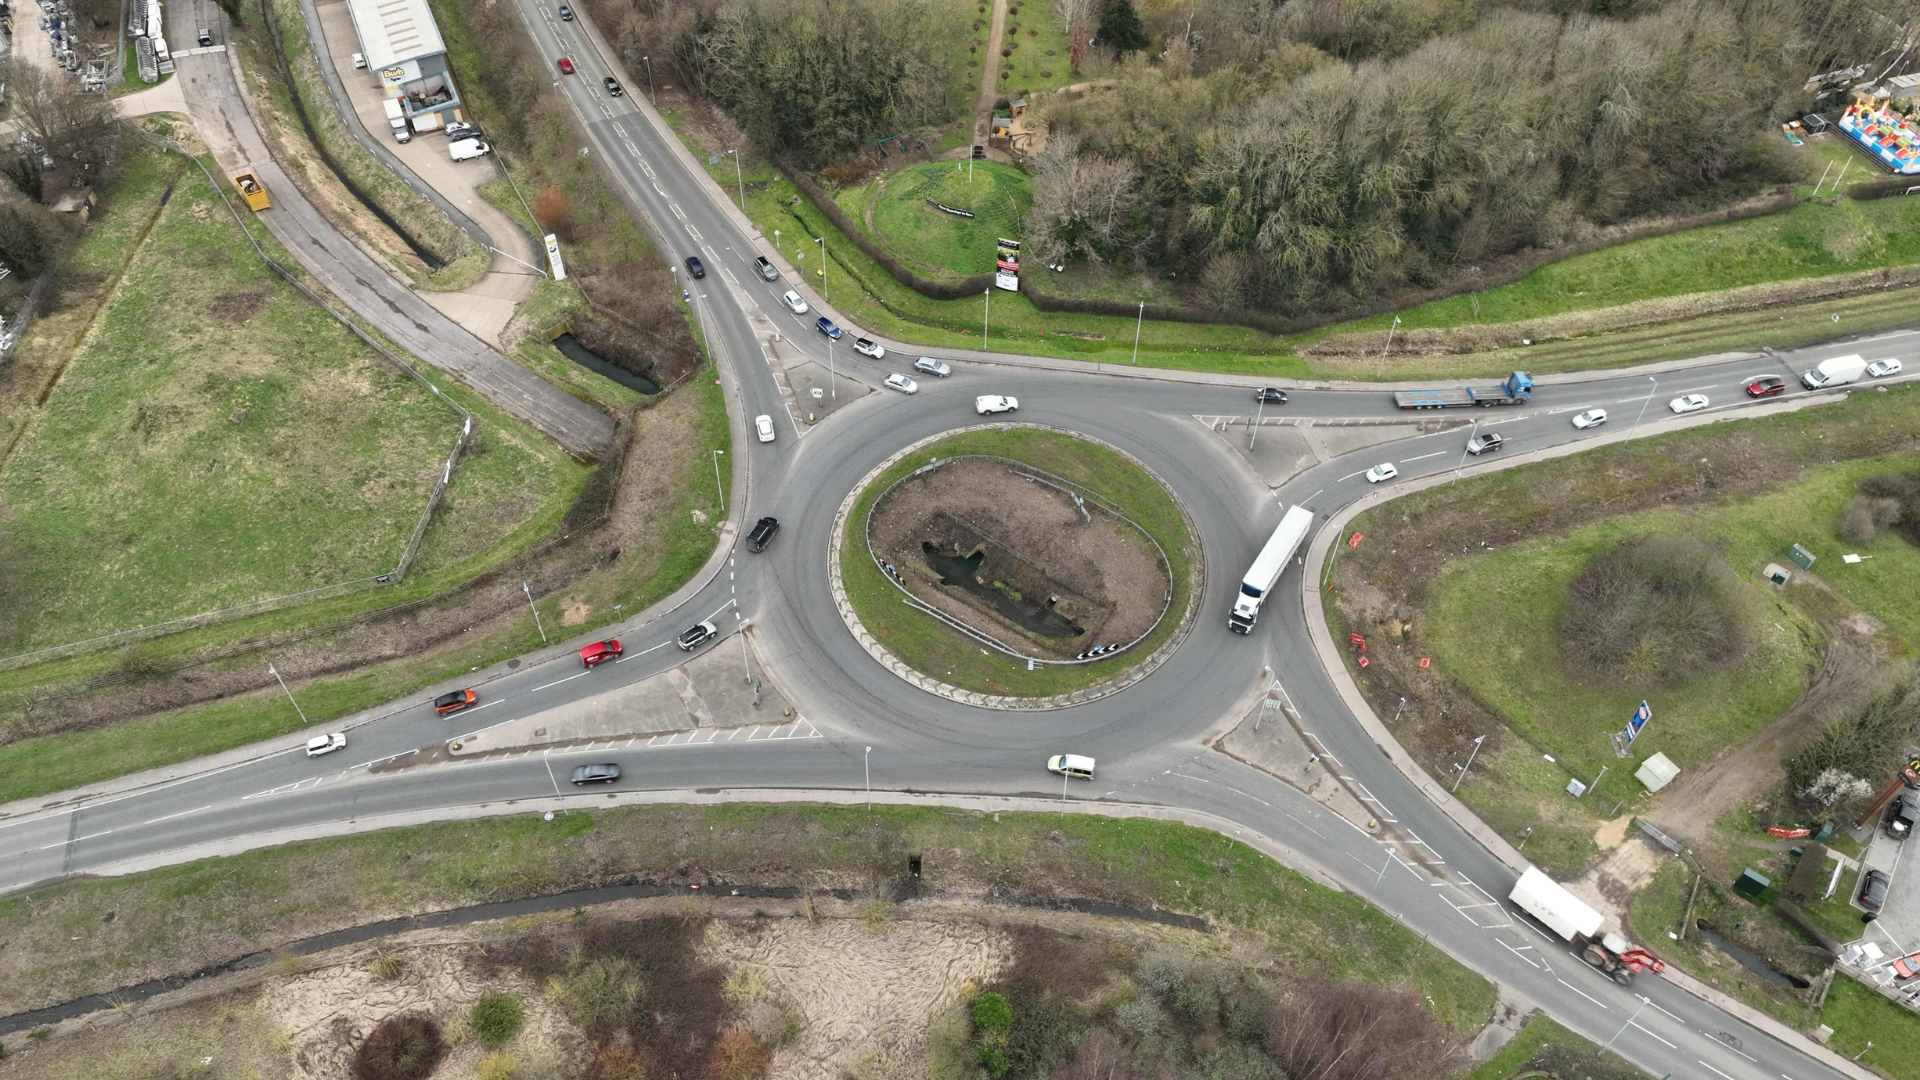 An overhead view of the Springfield roundabout